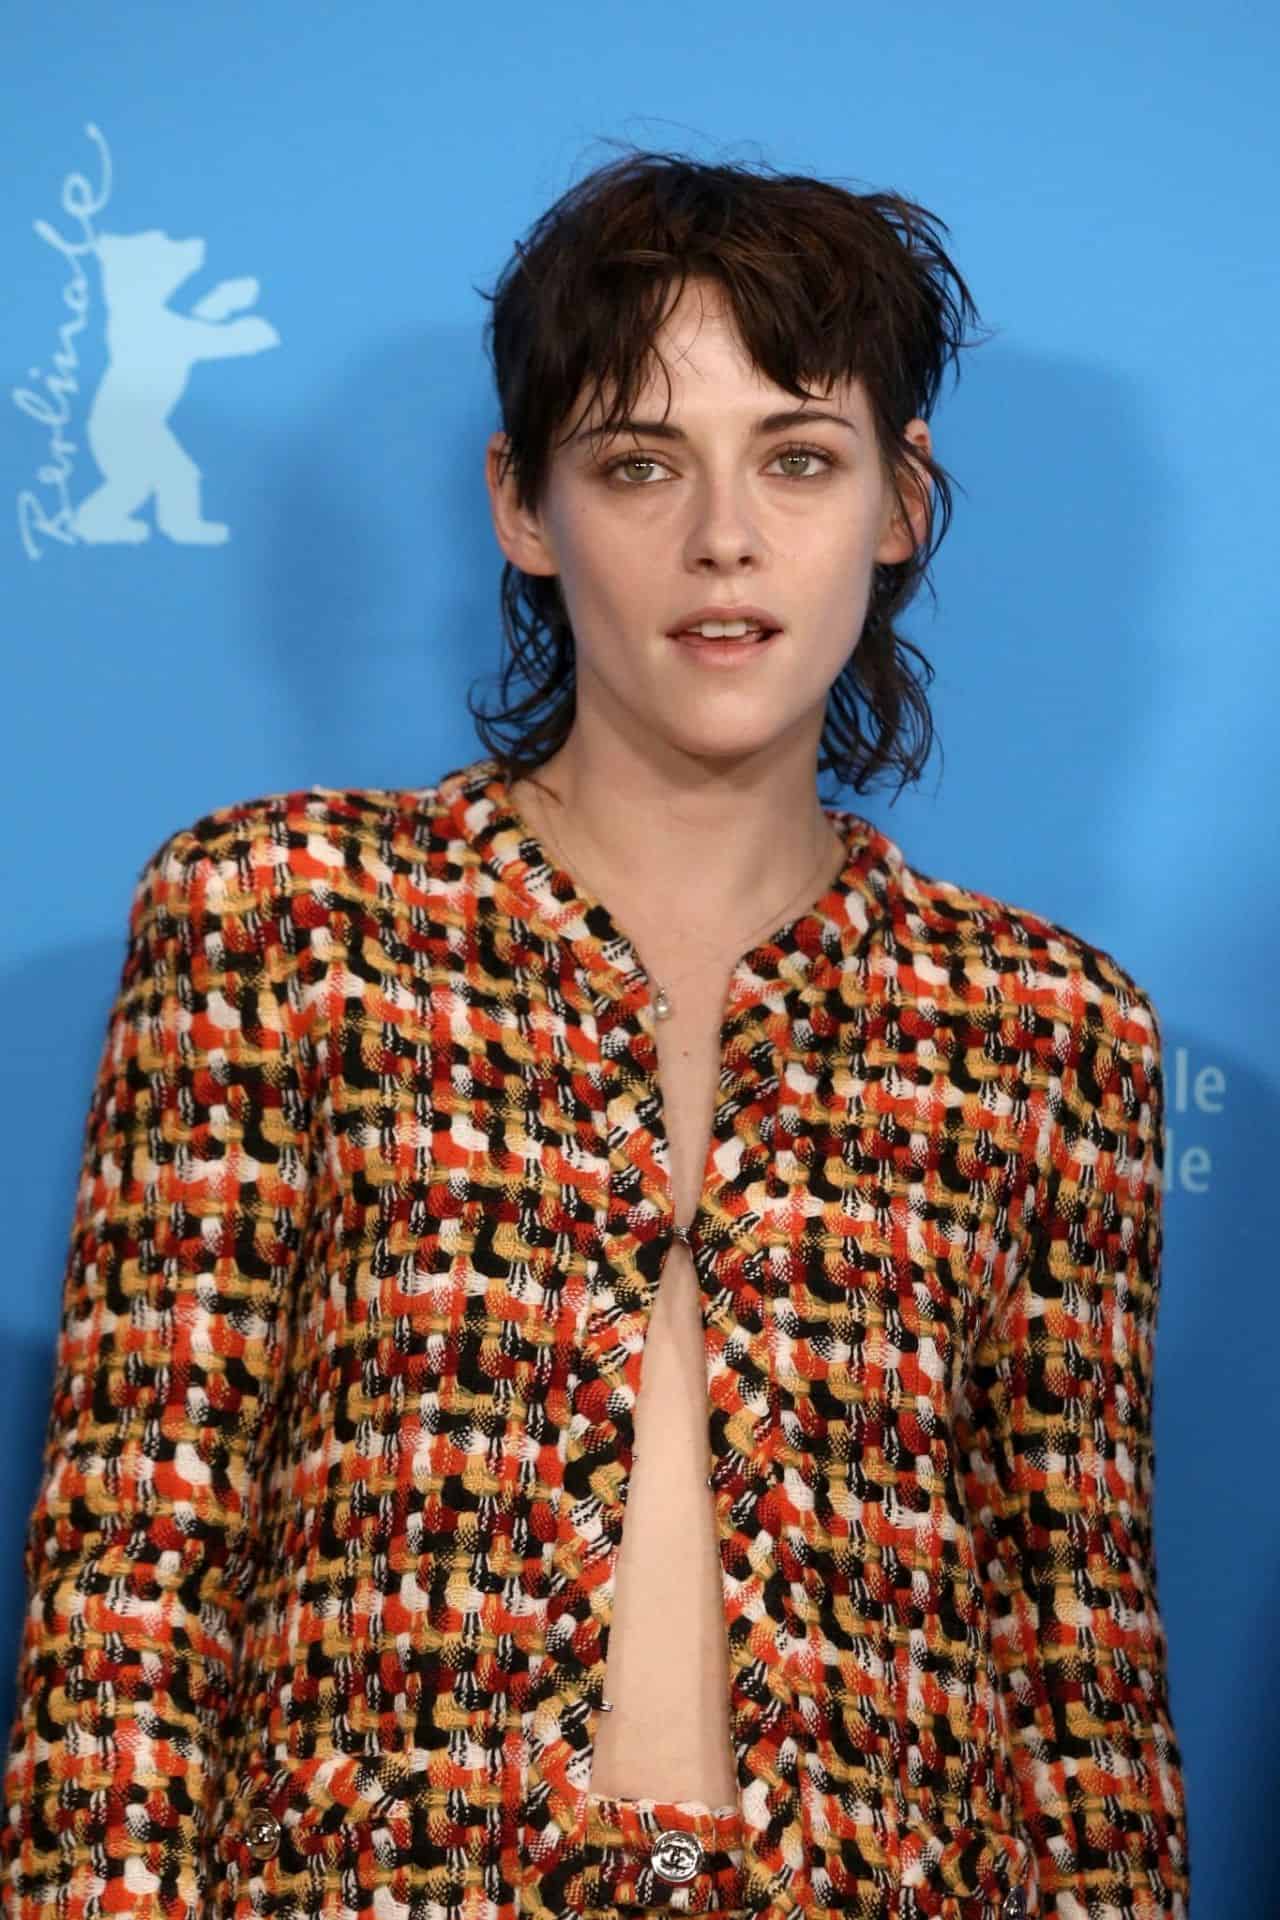 Kristen Stewart Poses in Colorful Ensemble at 73rd Berlinale Film Festival